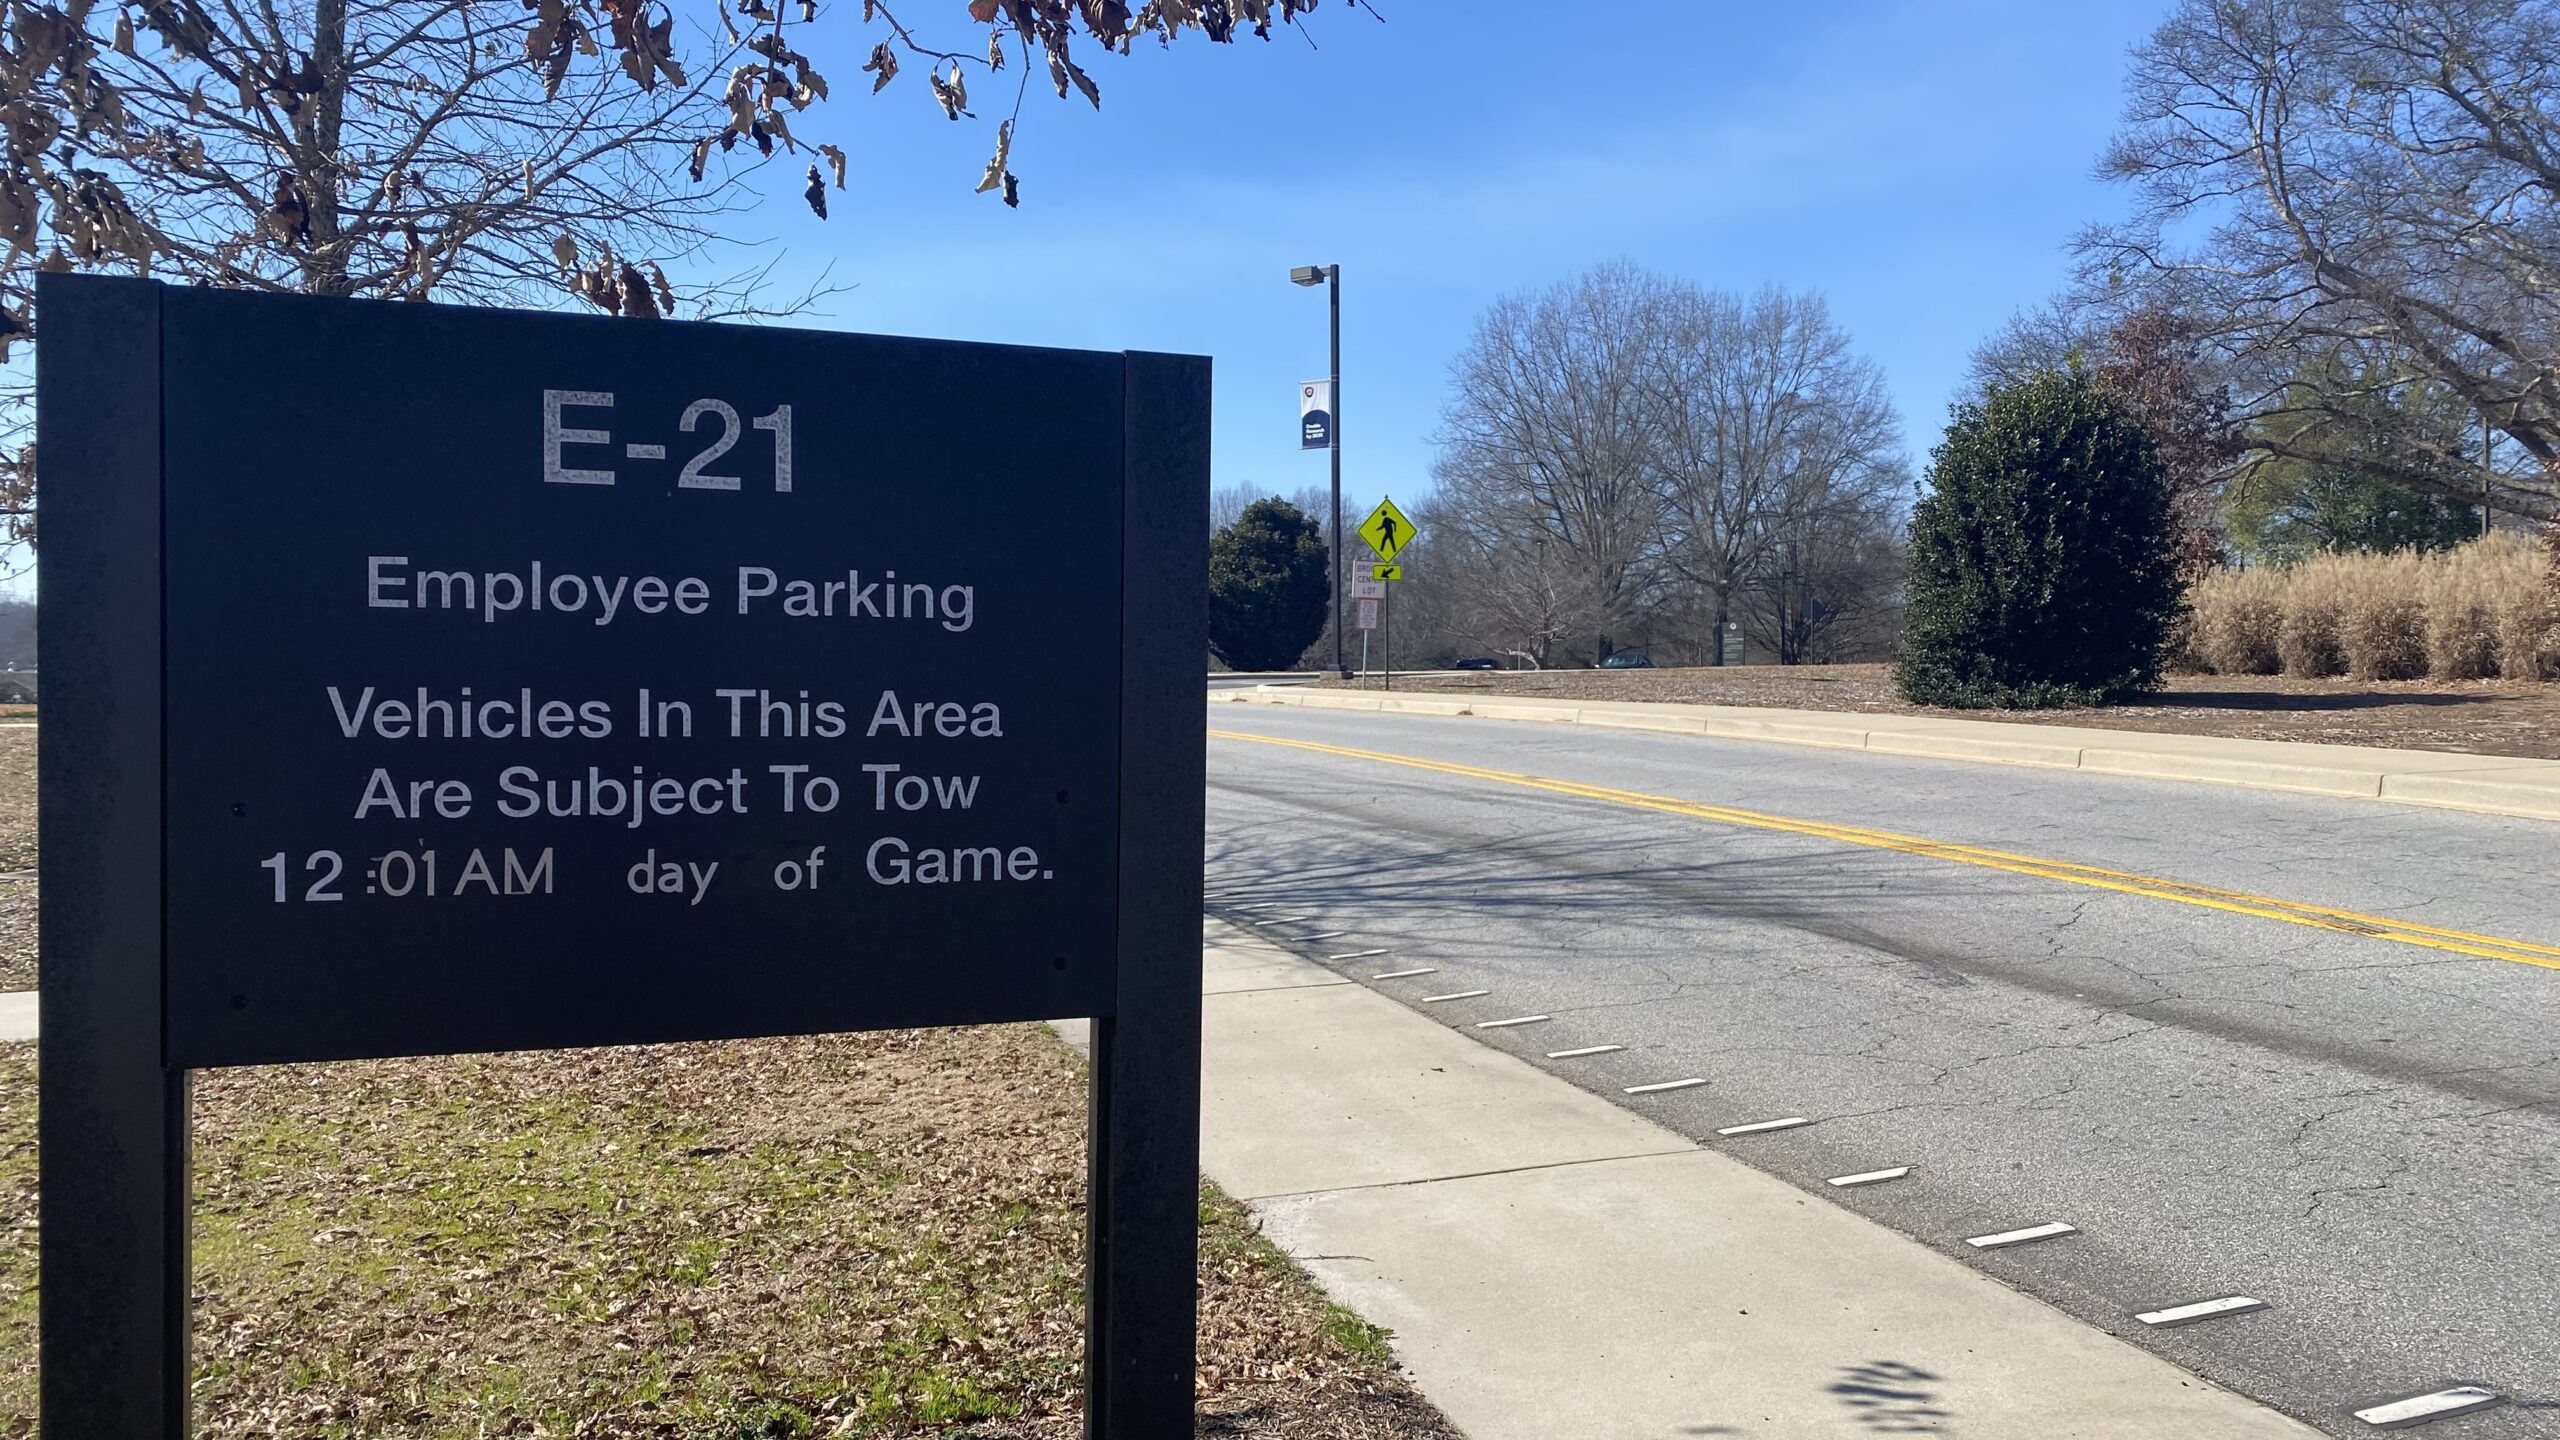 A roadsign sign reading "E-21 Employee Parking Vehicles in this area are subject to tow 12:01 AM day of game"